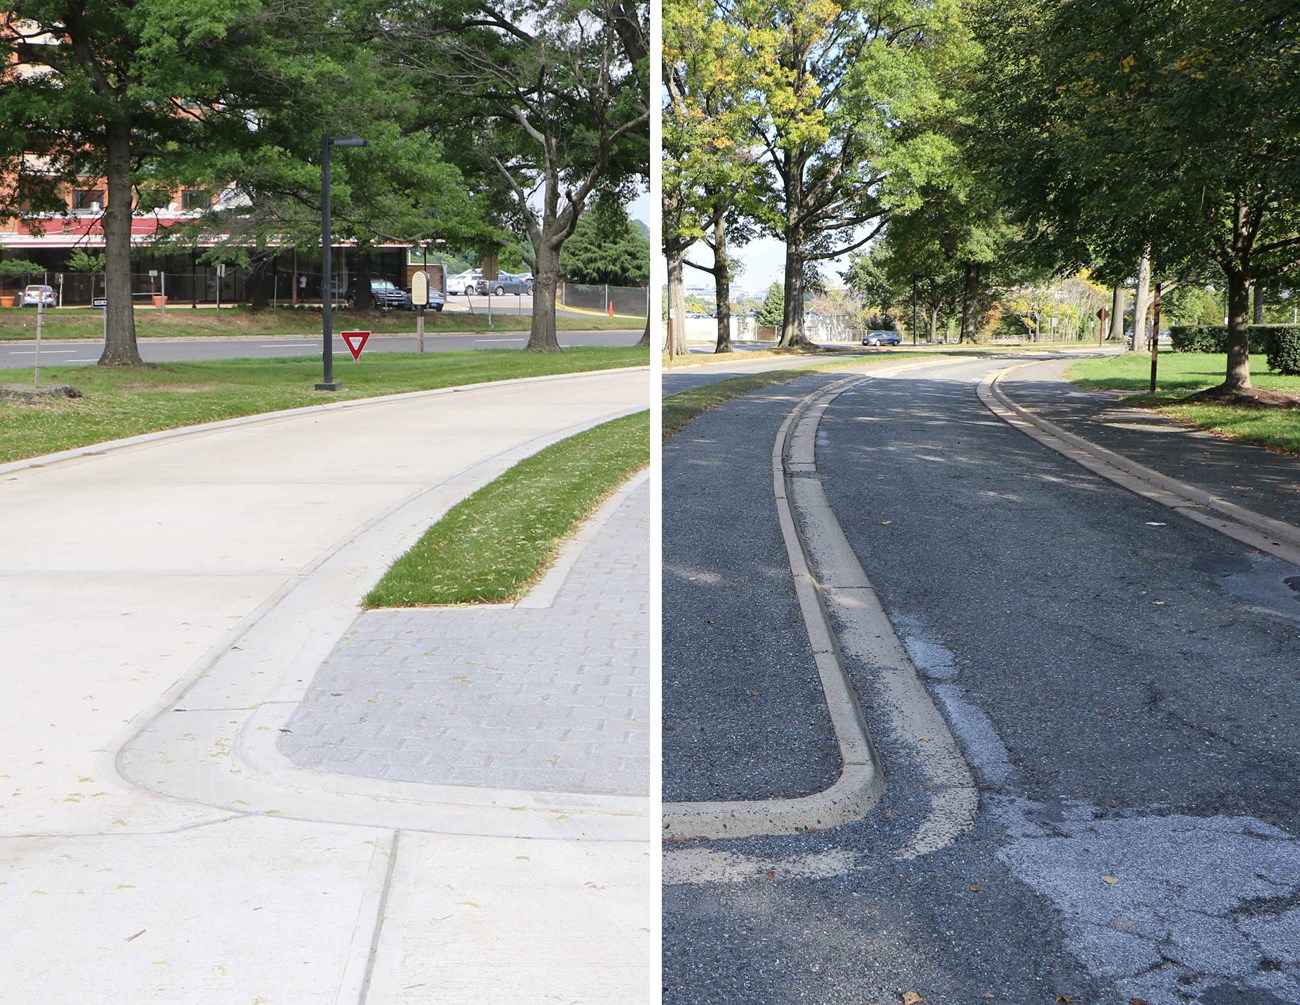 Left side shows the new concrete road and the right shows the old asphalt road.